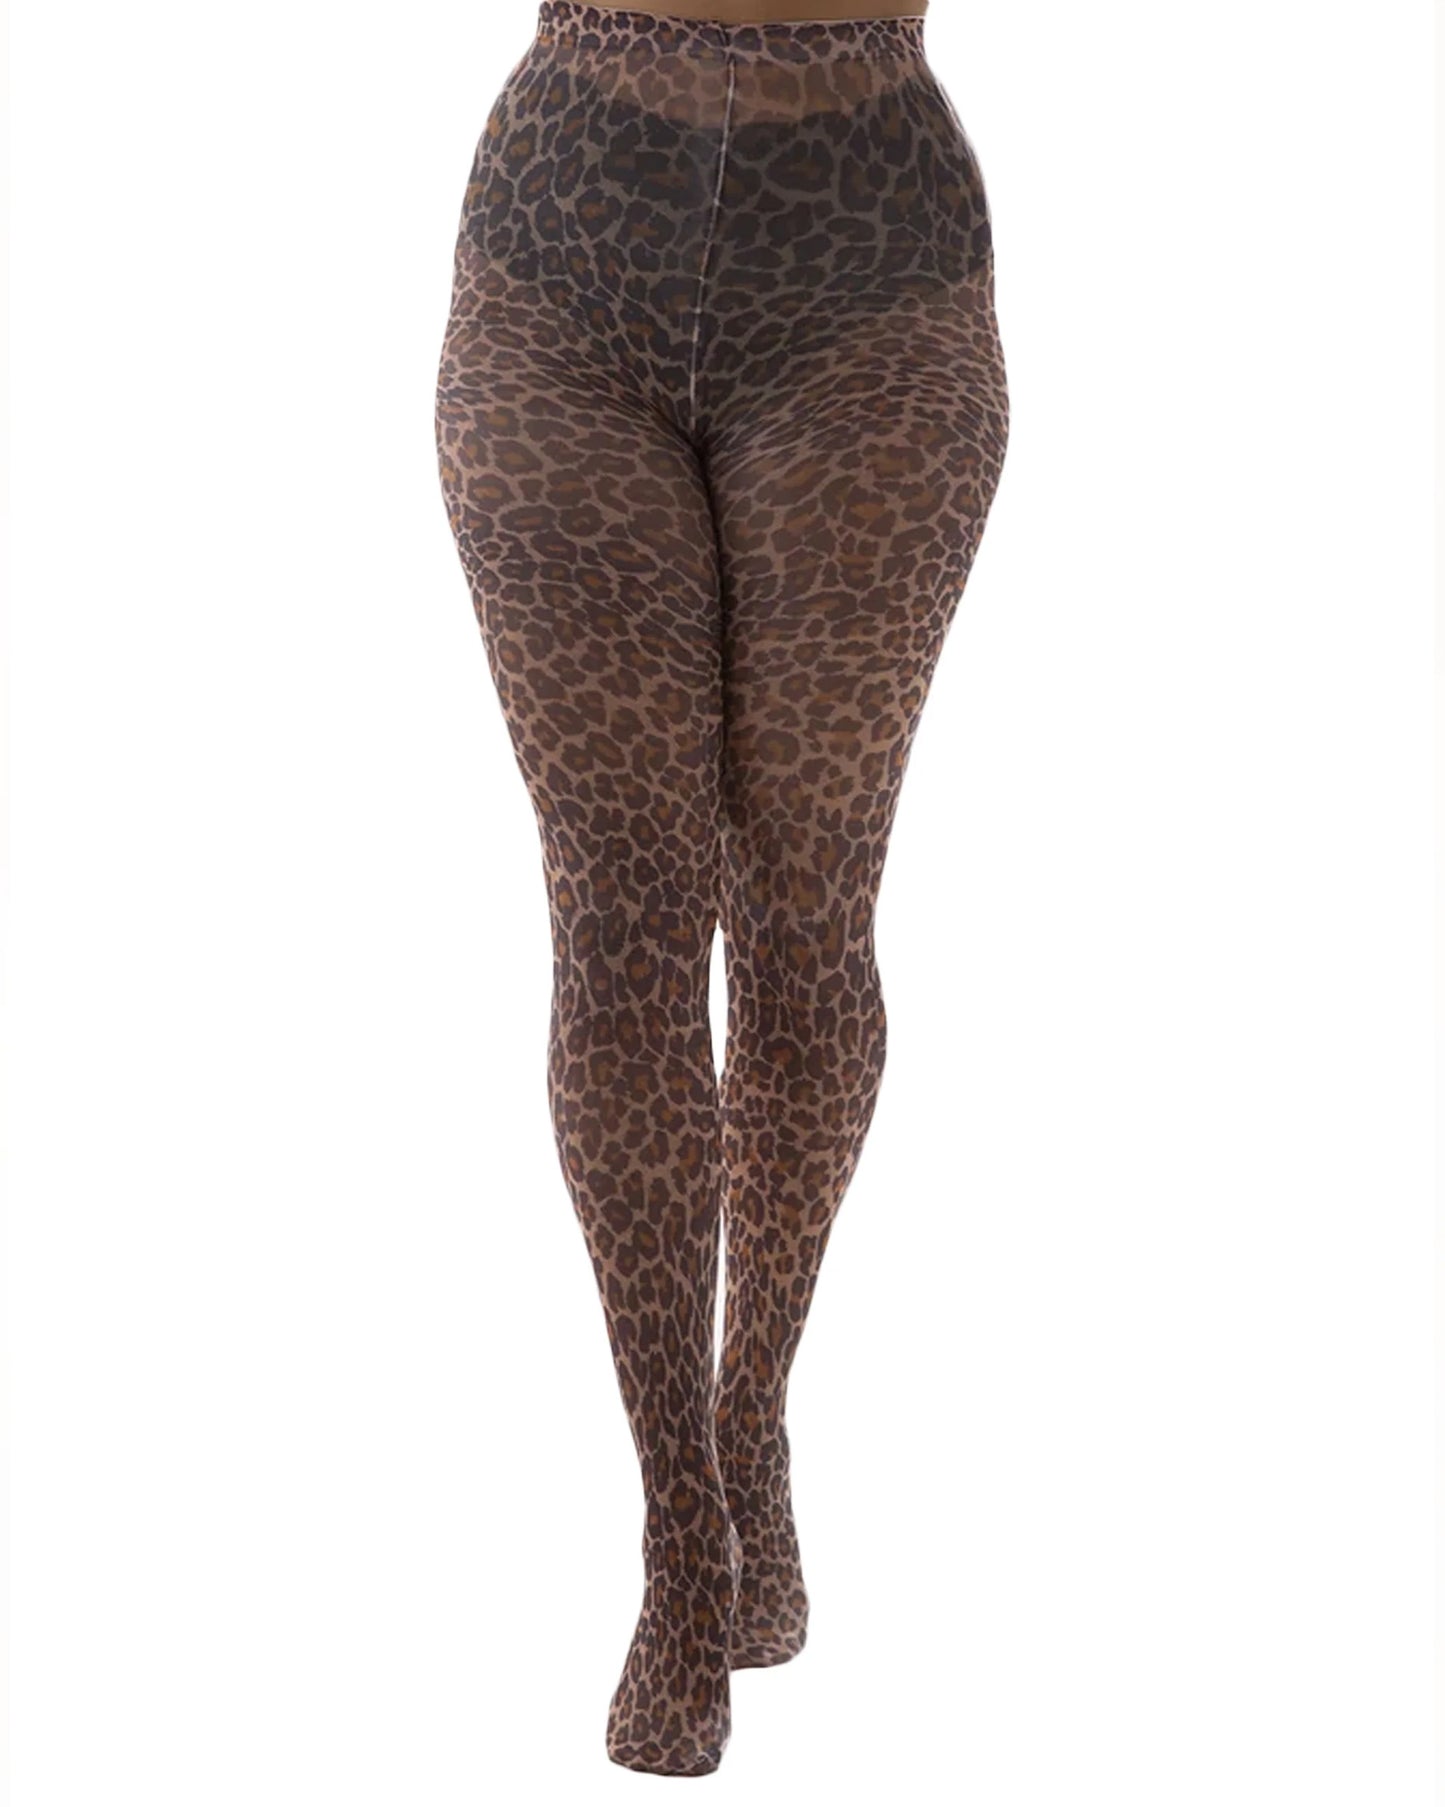 Pamela Mann Leopard Print Tights - nude opaque tights with a brown and black animal print pattern.